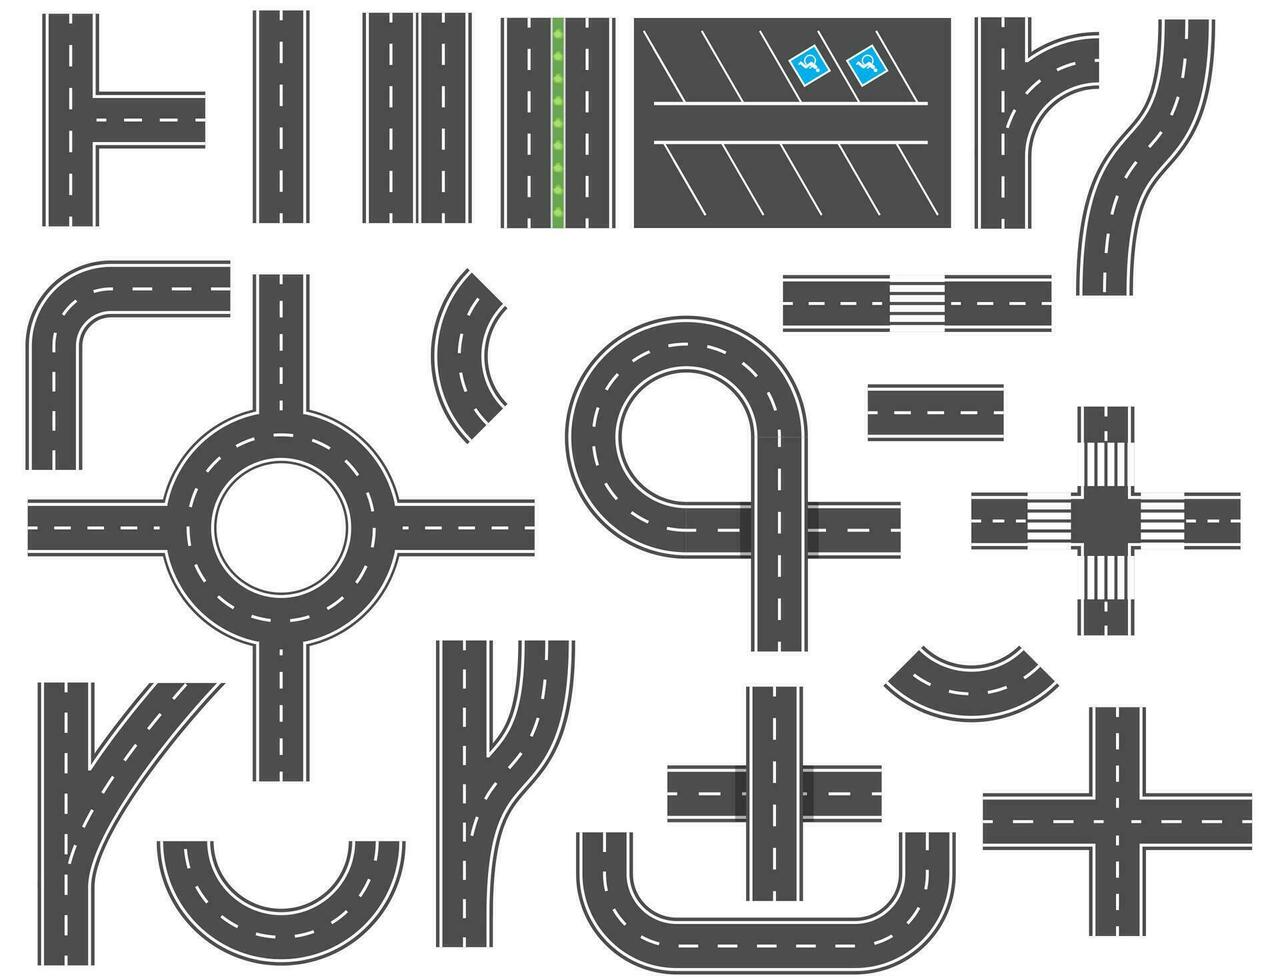 Asphalt roads design elements for city map. Street and road with footpaths and crossroads. elements for city map. Highway asphalt path traffic streets. Vector illustration in flat style